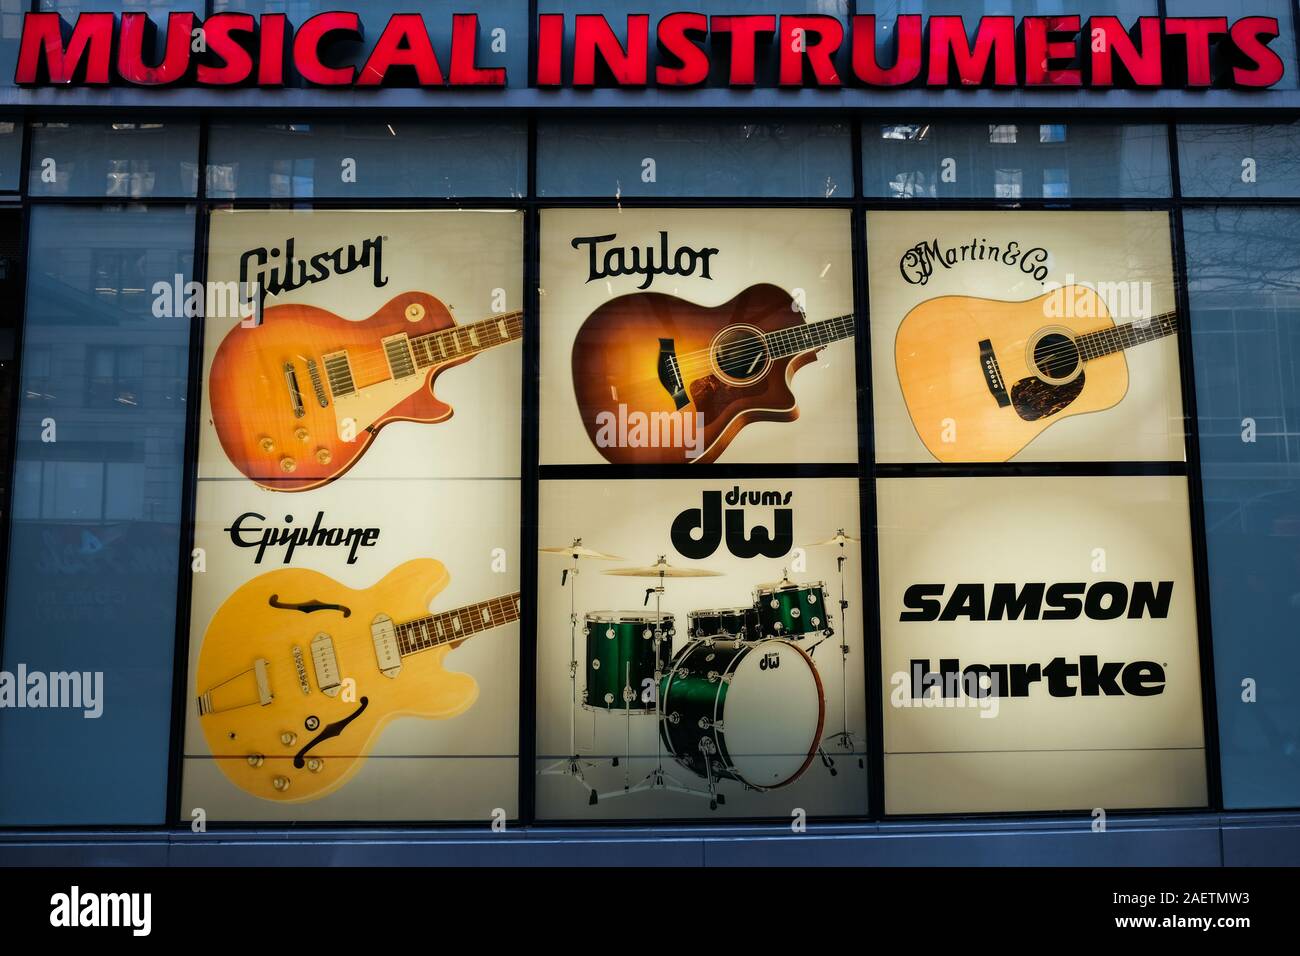 Musical instruments sign on Sam Ash music store, West 34th Street, Manhattan, NYC. Stock Photo